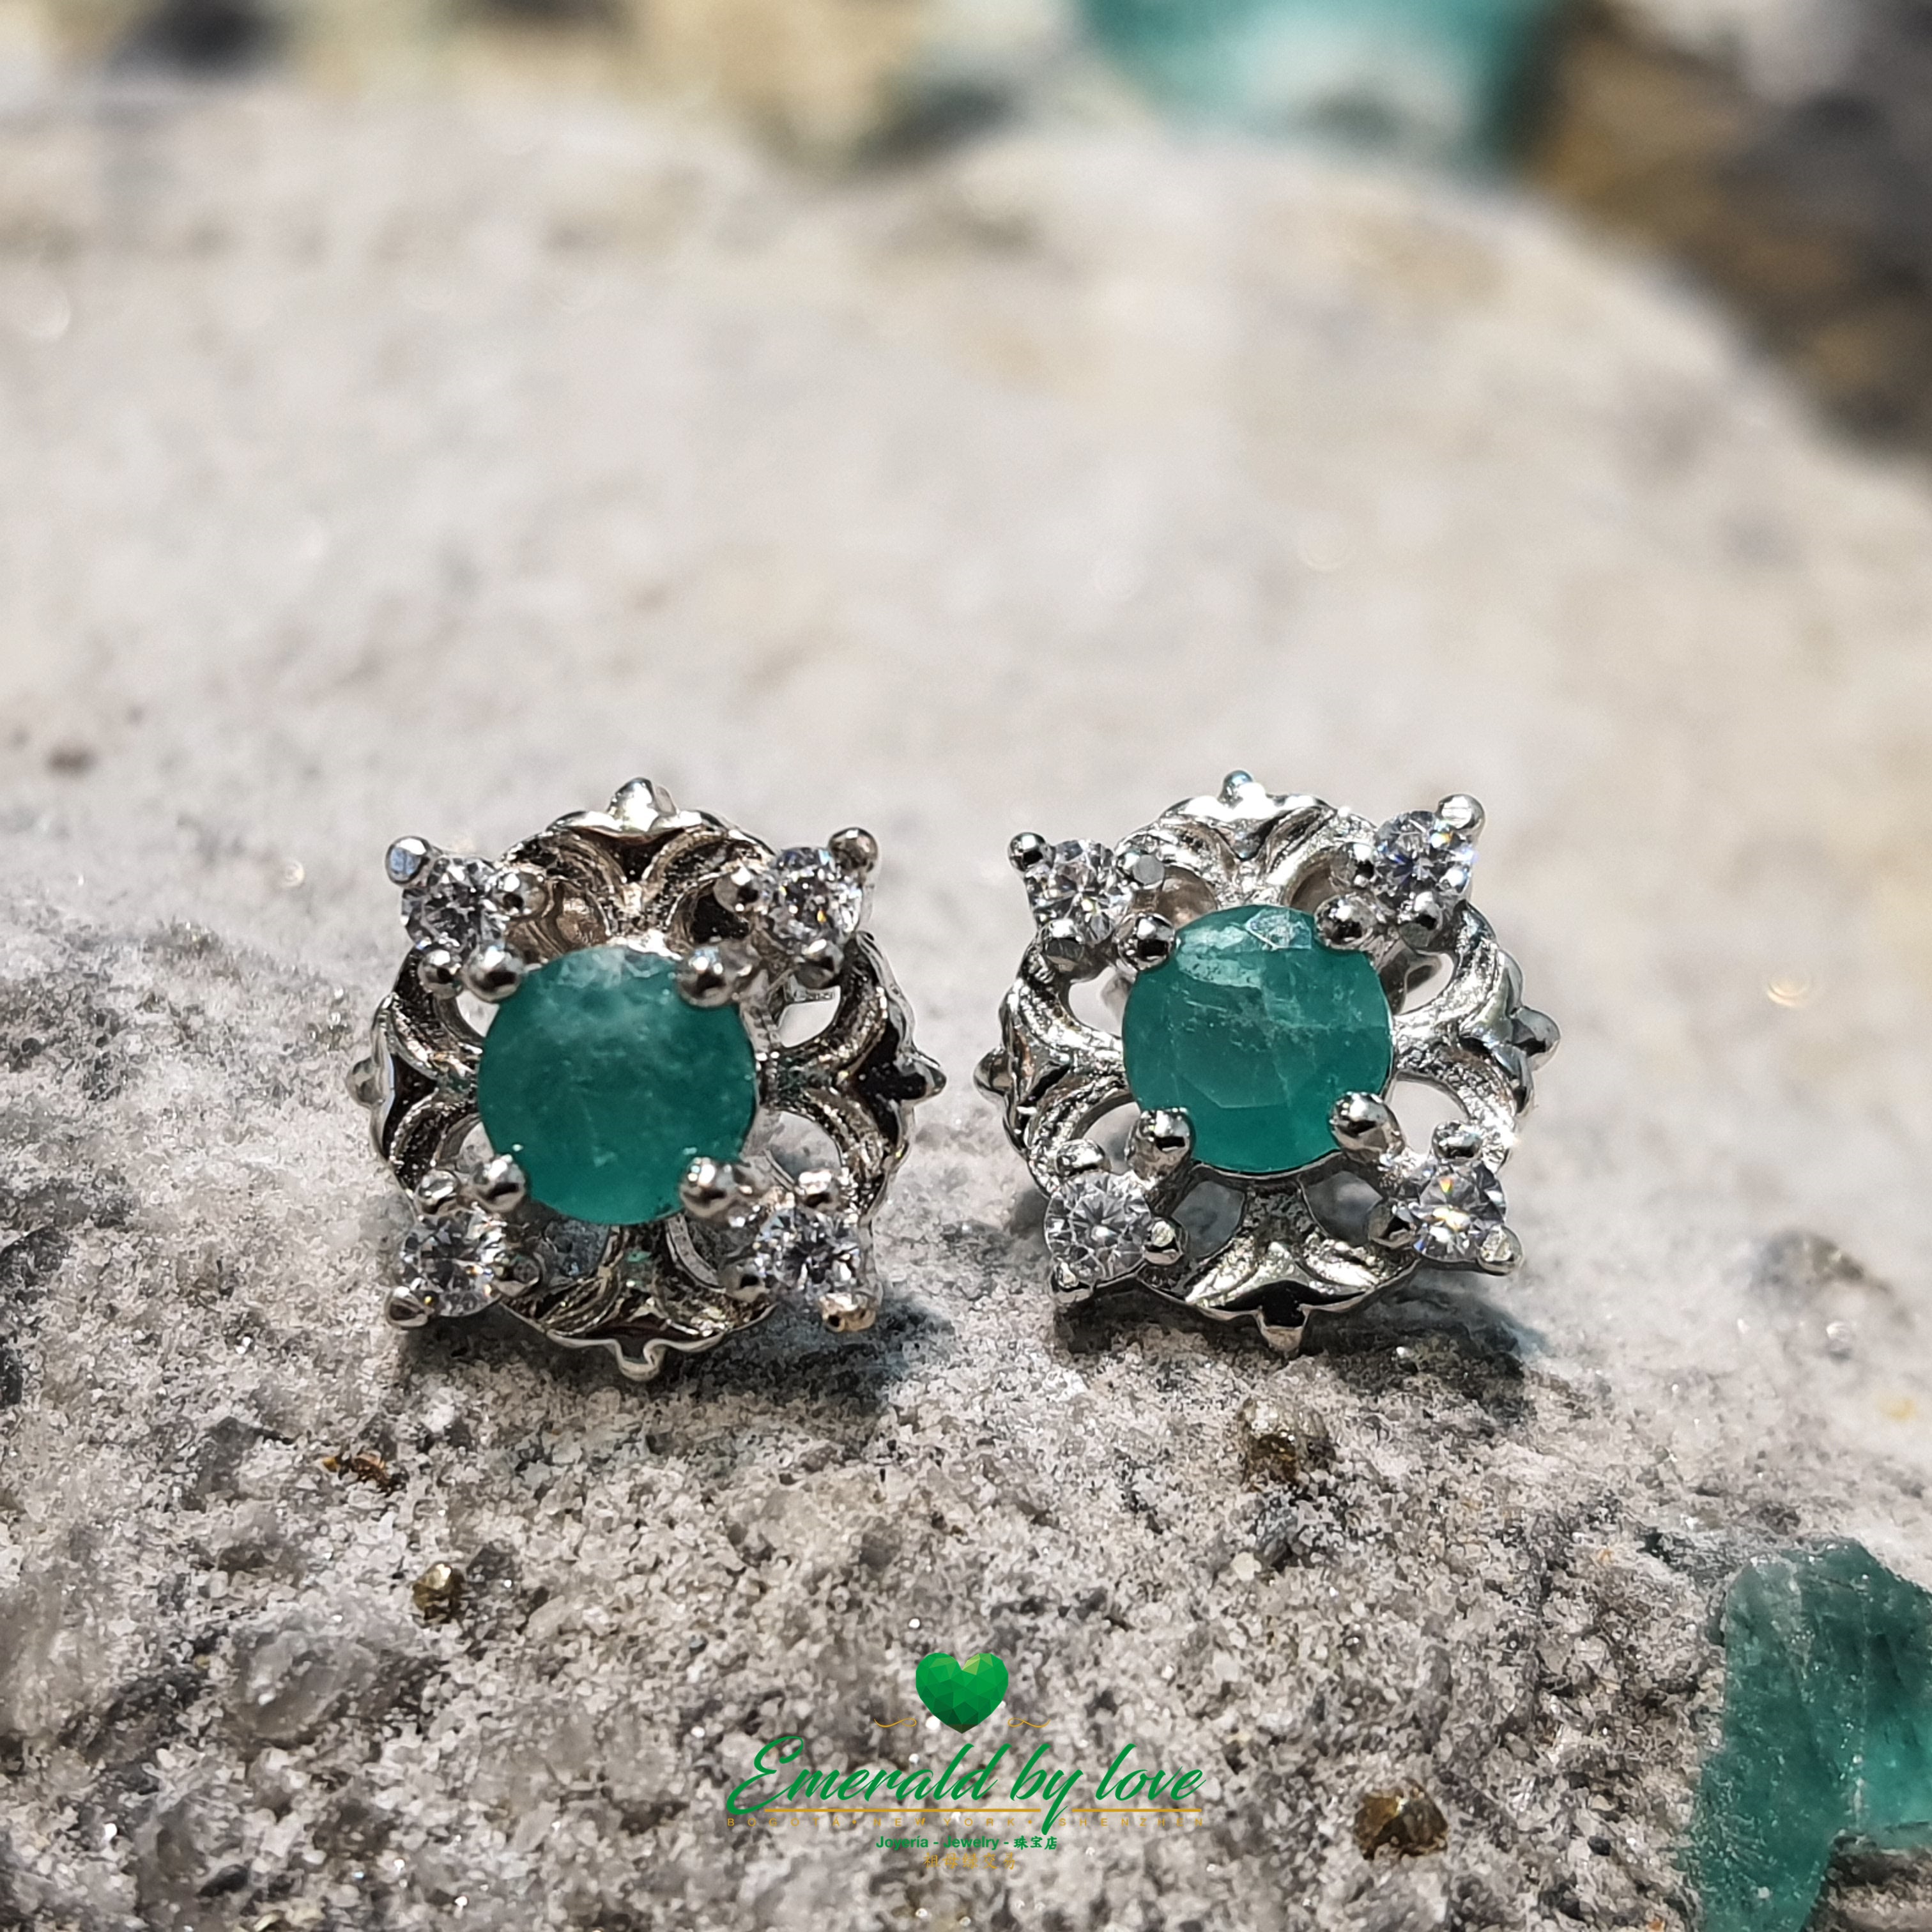 Elegant Silver Earrings with Round Colombian Emeralds in Floral Design